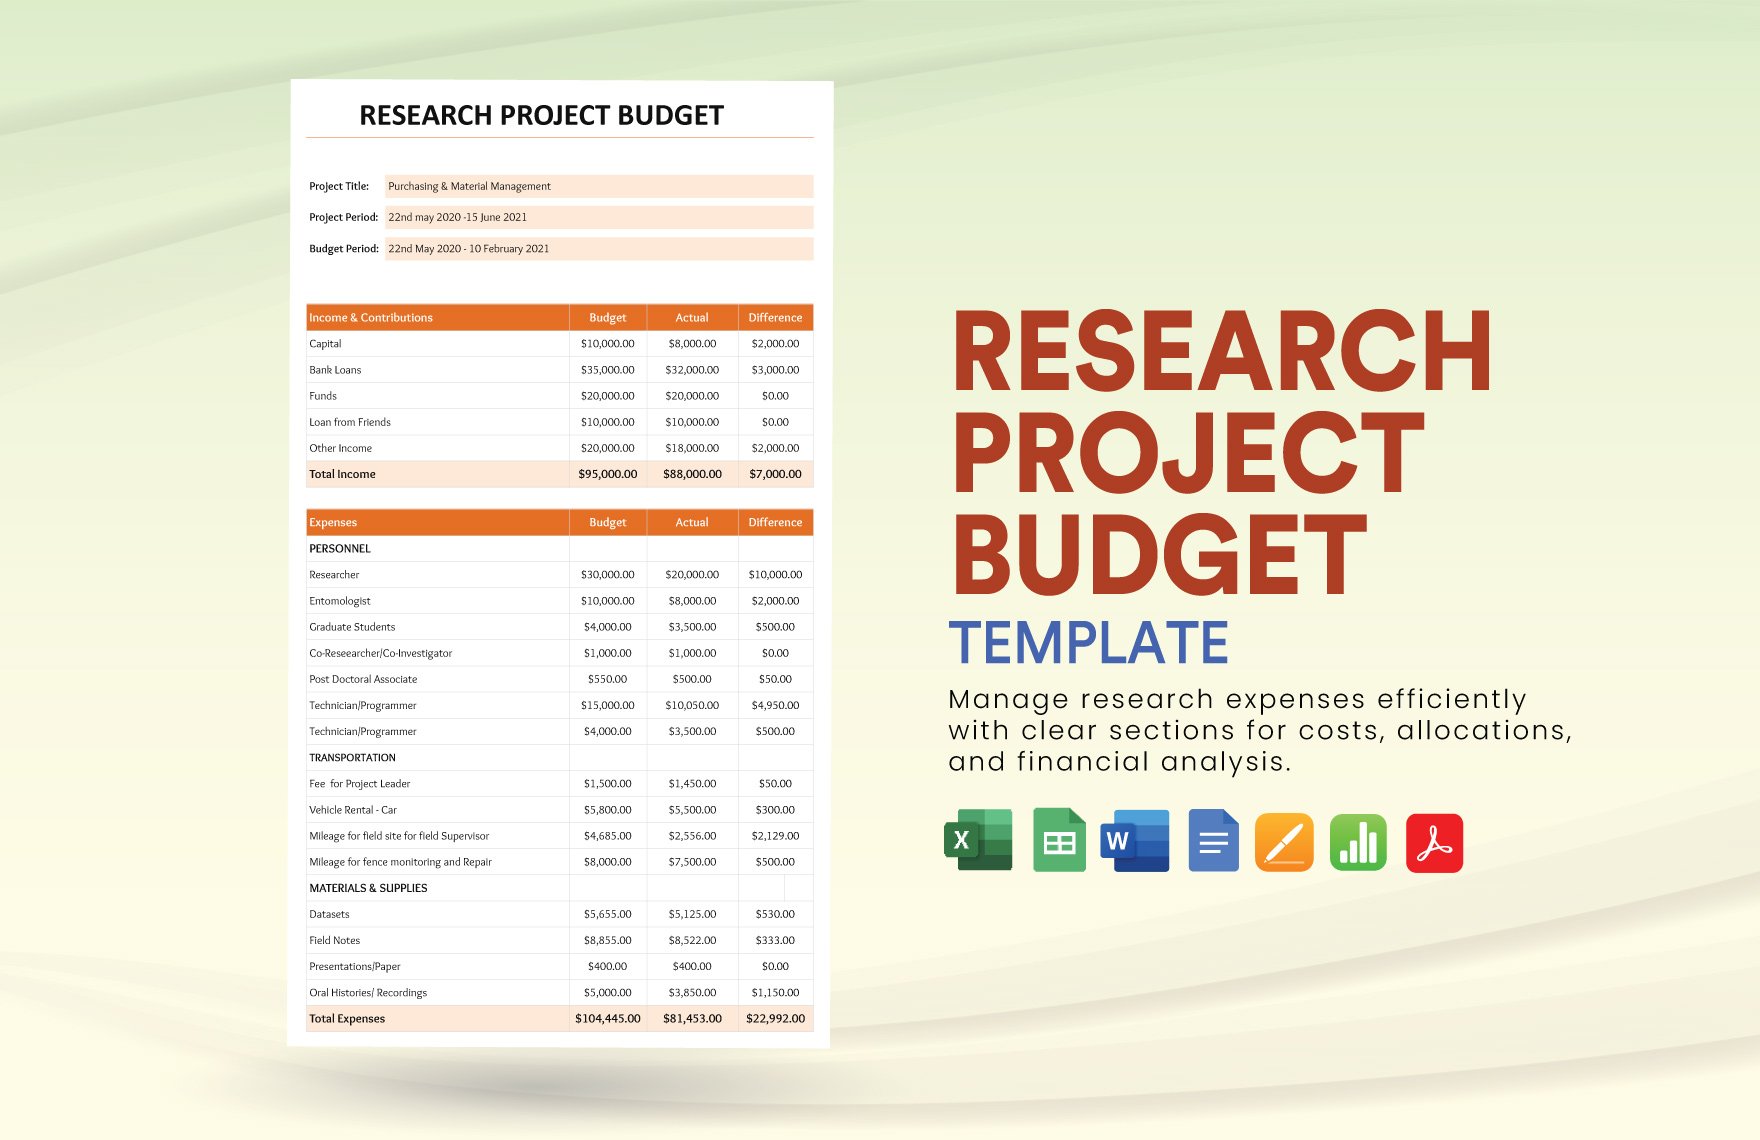 Research Project Budget Template in Word, Google Docs, Excel, PDF, Google Sheets, Apple Pages, Apple Numbers